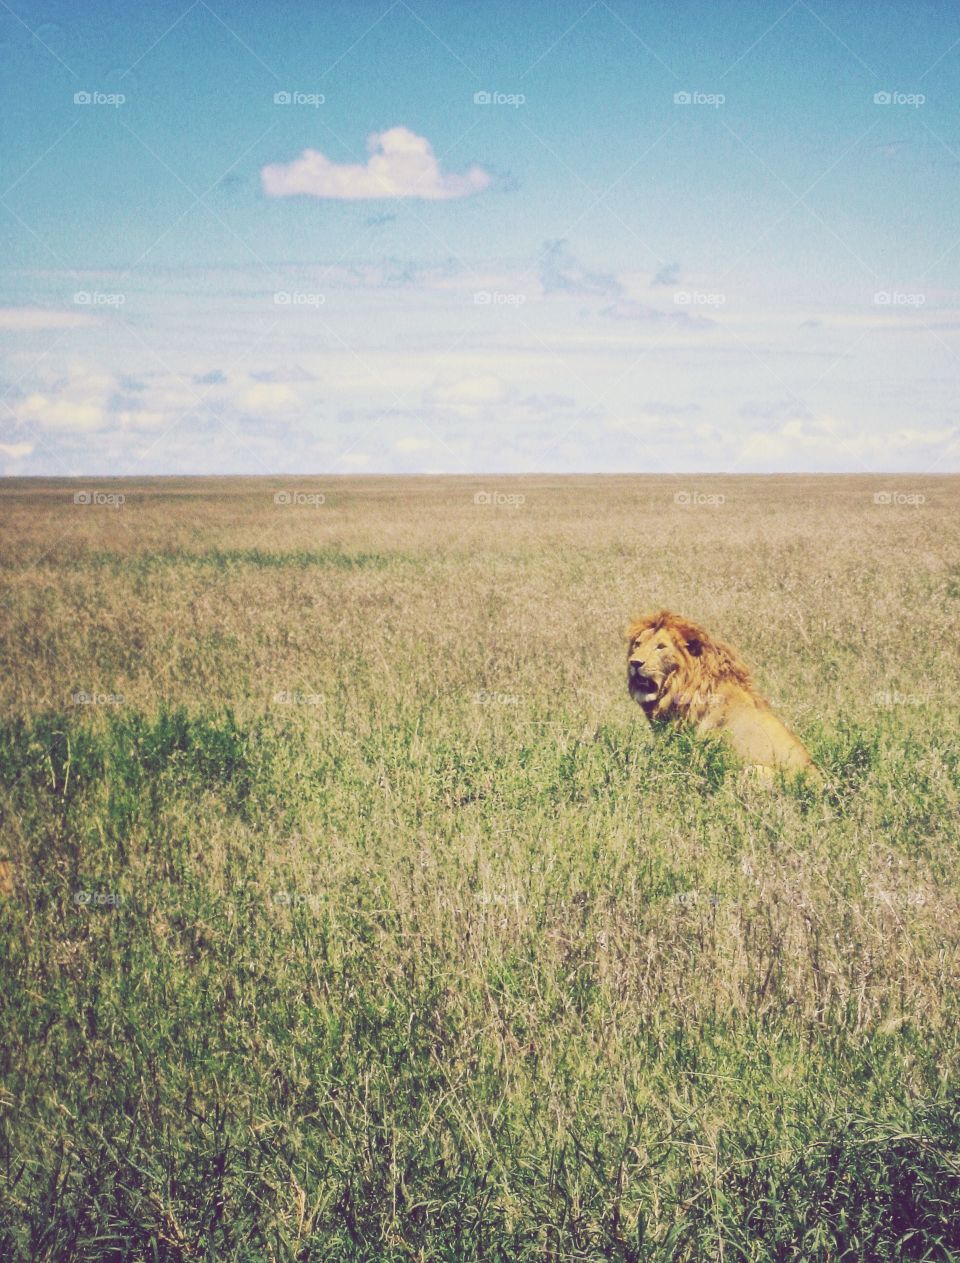 Proud Lion. Single lion sits tall and proudly on the savannas of Africa